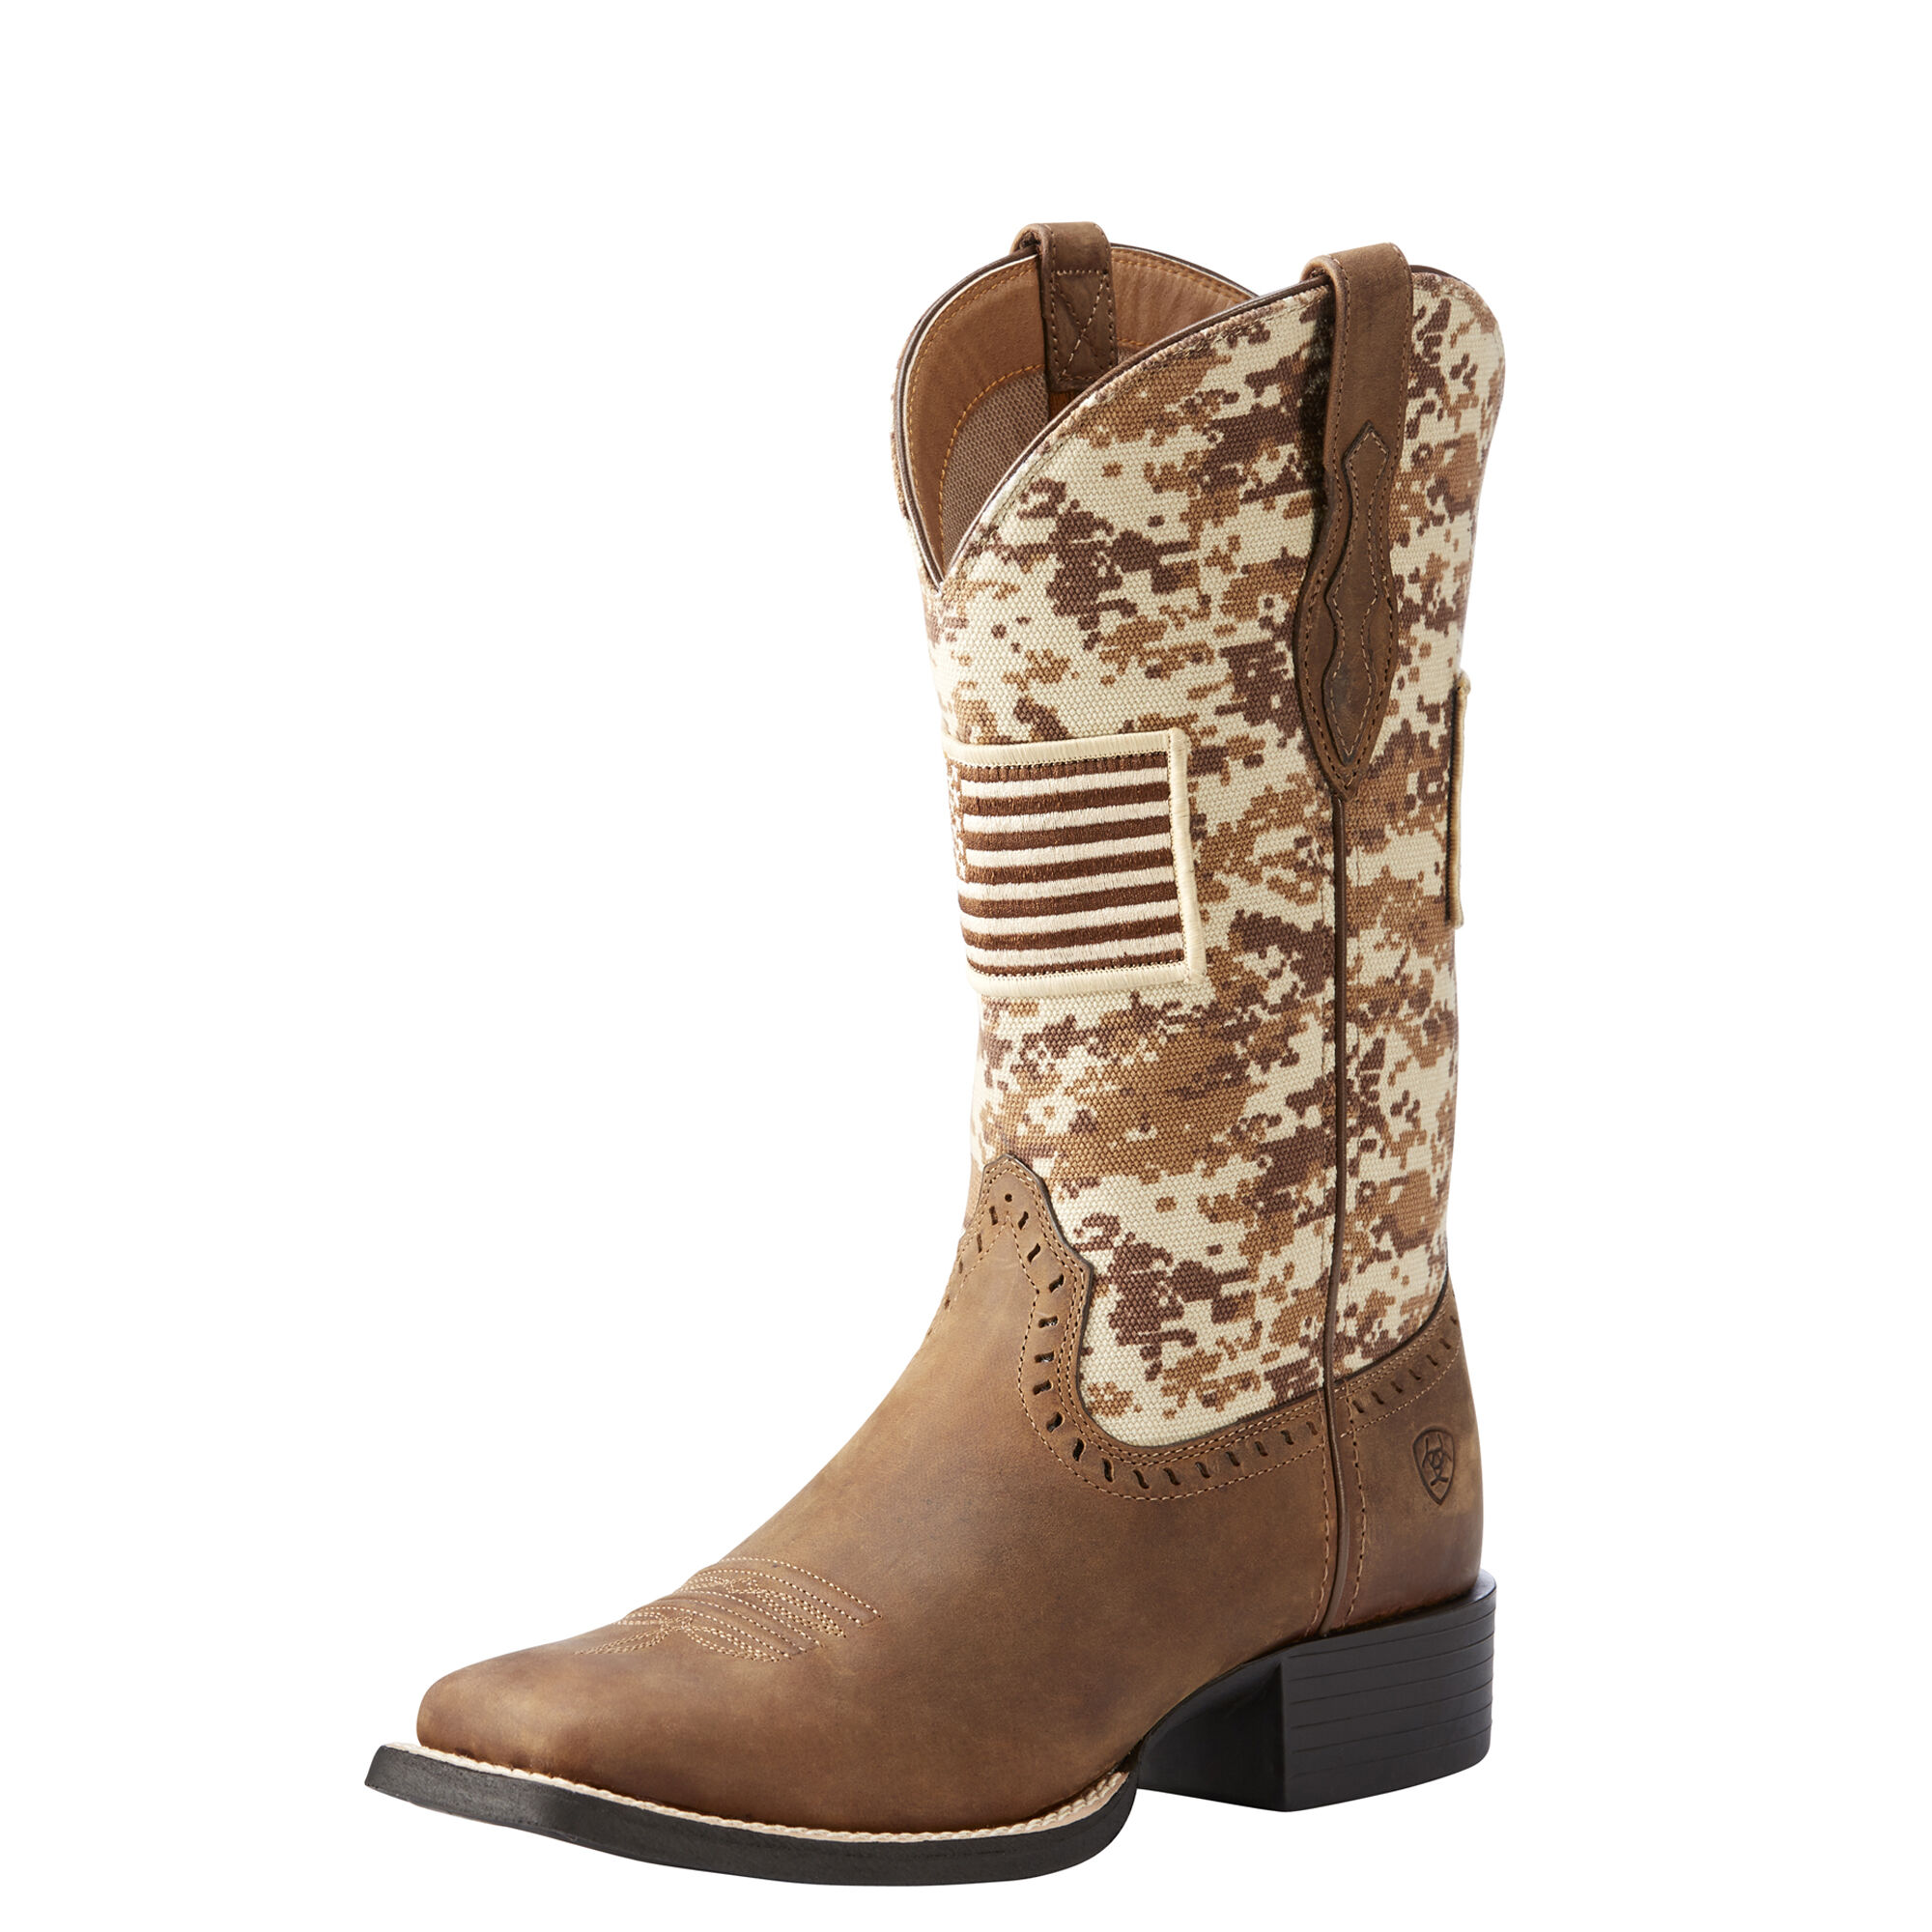 American Flag Cowgirl Boots - Women's 